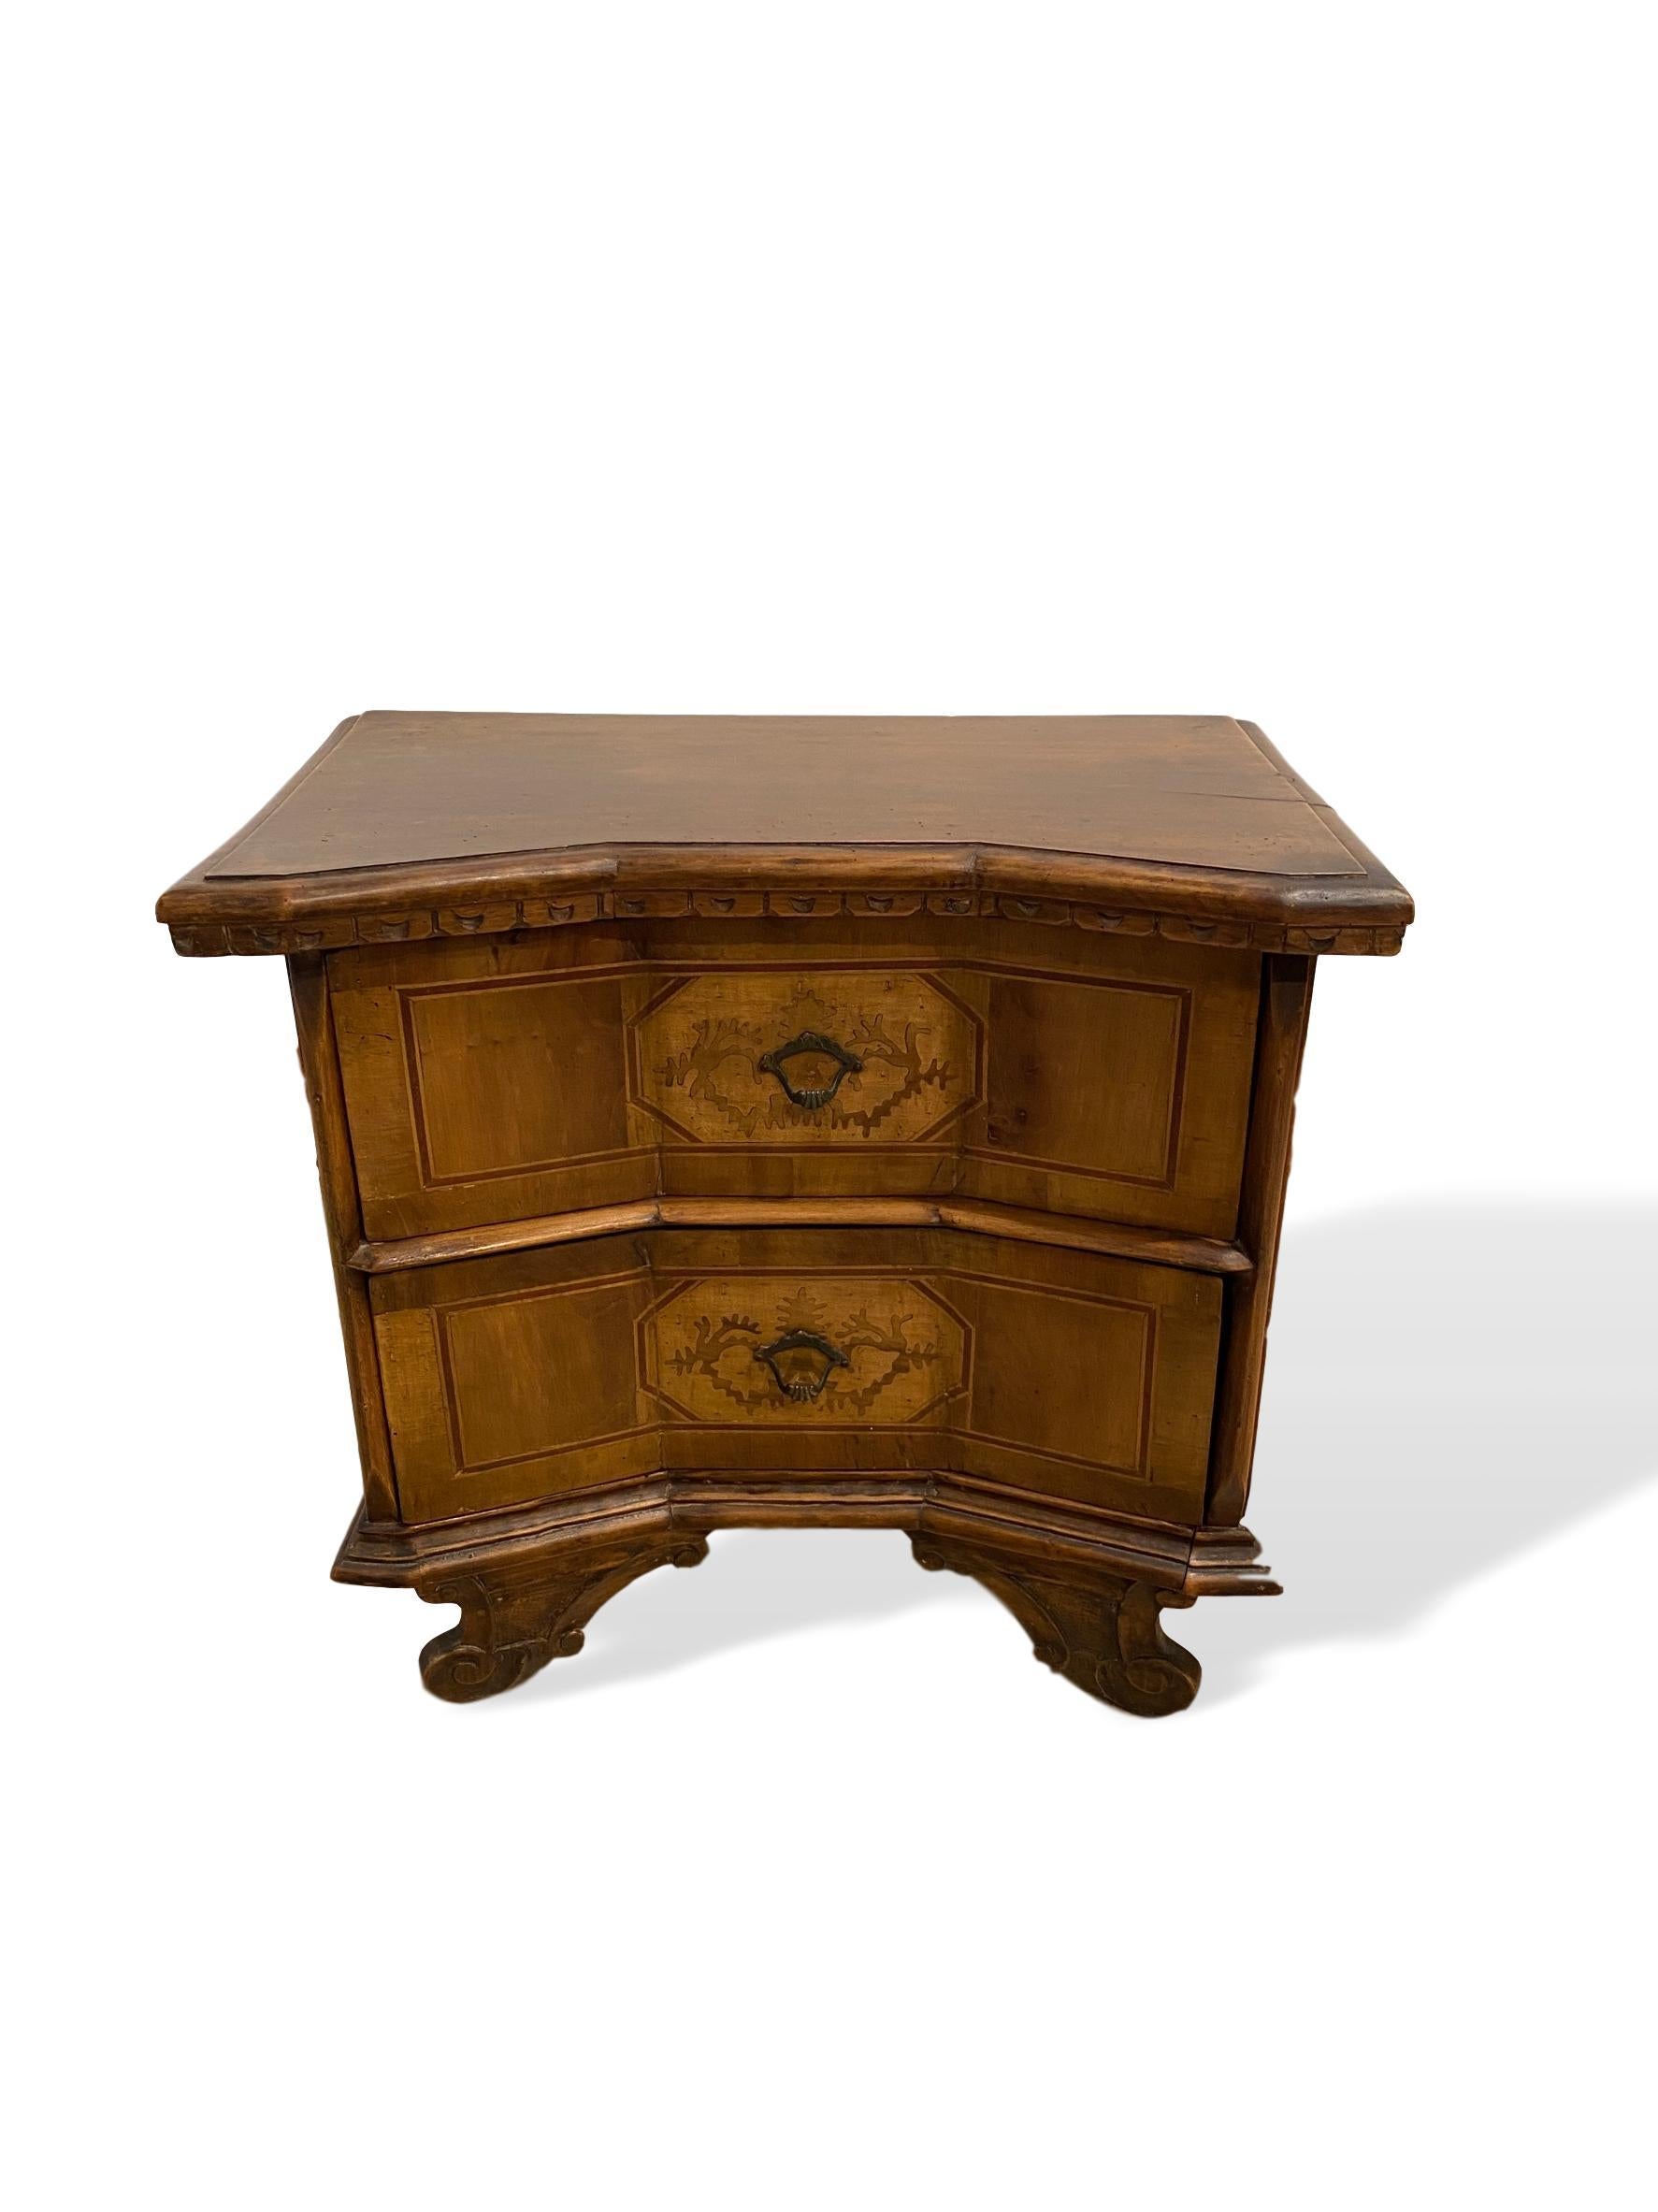 Inlaid walnut two-drawer side commode with concave block front, Italian, circa 1900, with shaped, molded top and half moon carved dentil molding below, with highly desirable concave blocked front, with inlaid satinwood geometrical central inlays